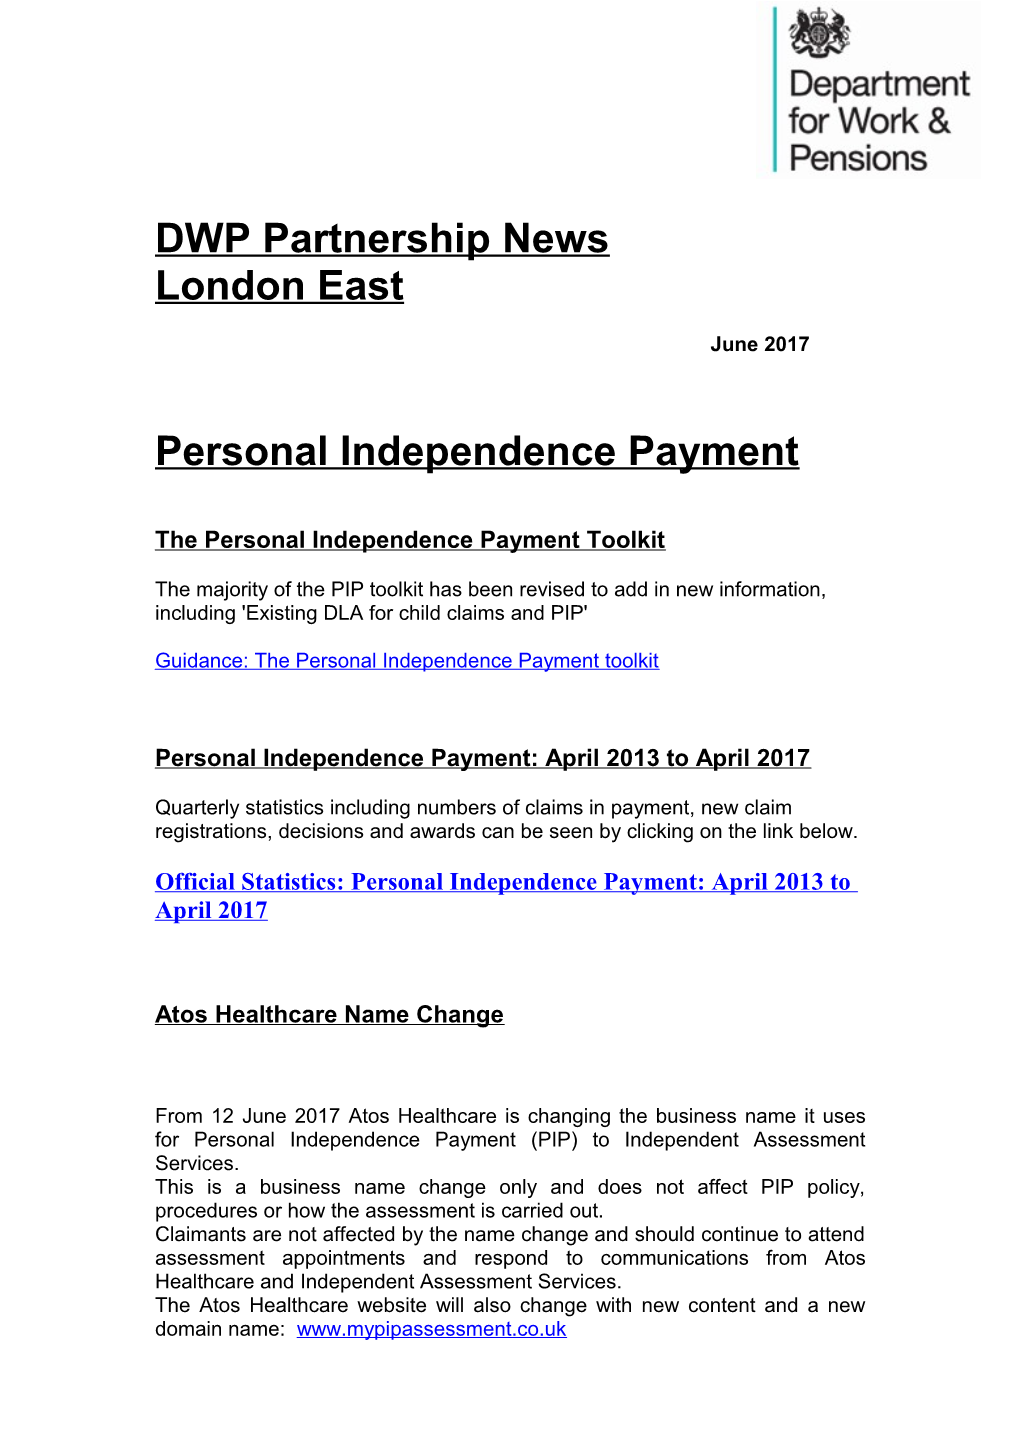 The Personal Independence Payment Toolkit